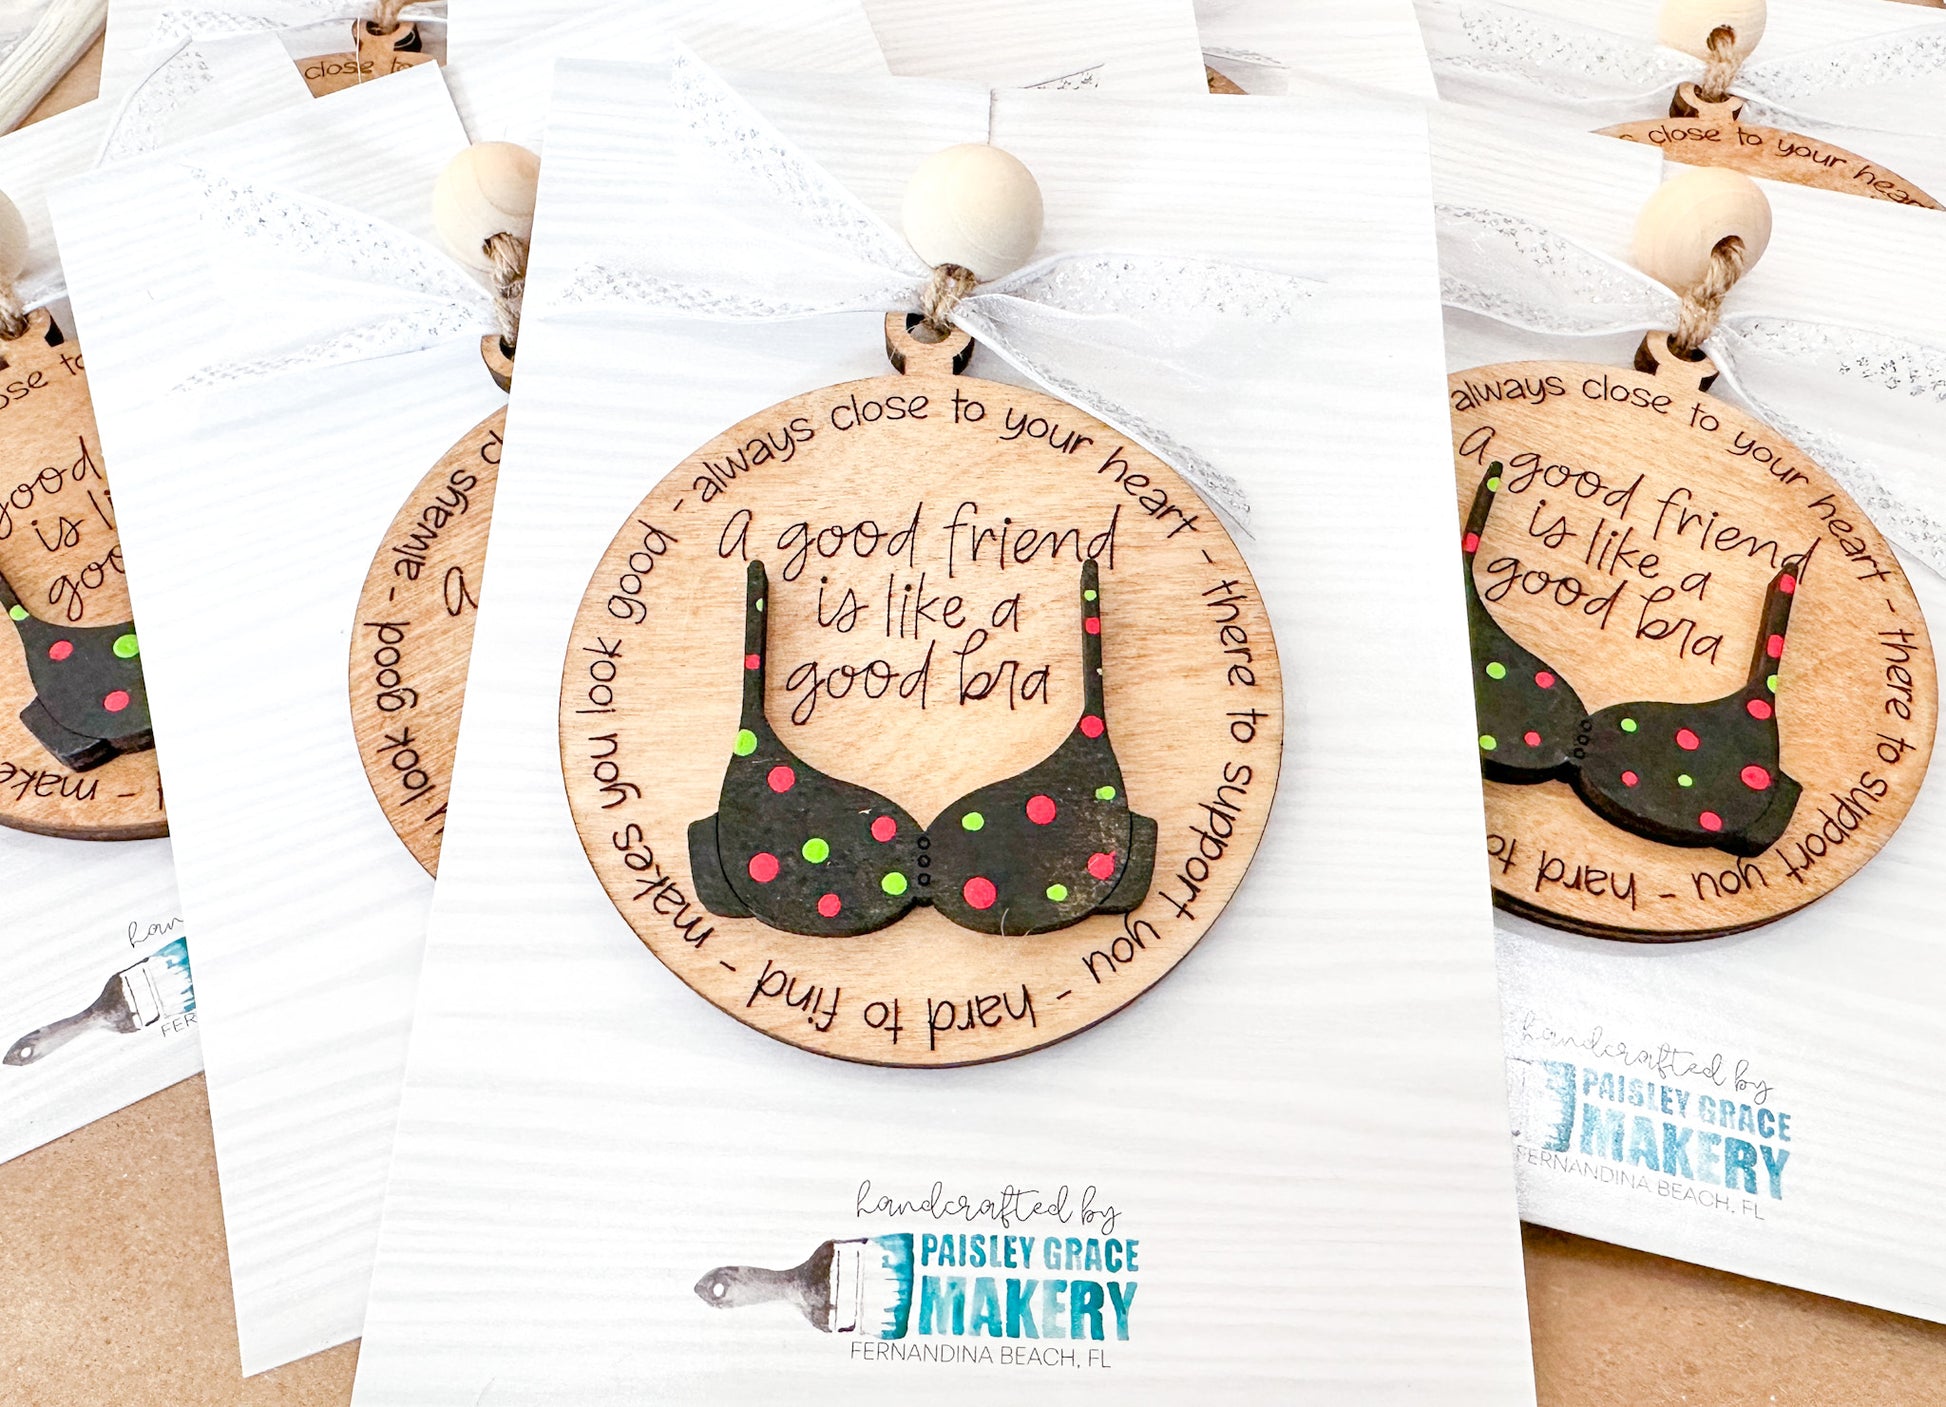 Good Friends Are Like a Good Bra Ornament – The Back Bay Mercantile